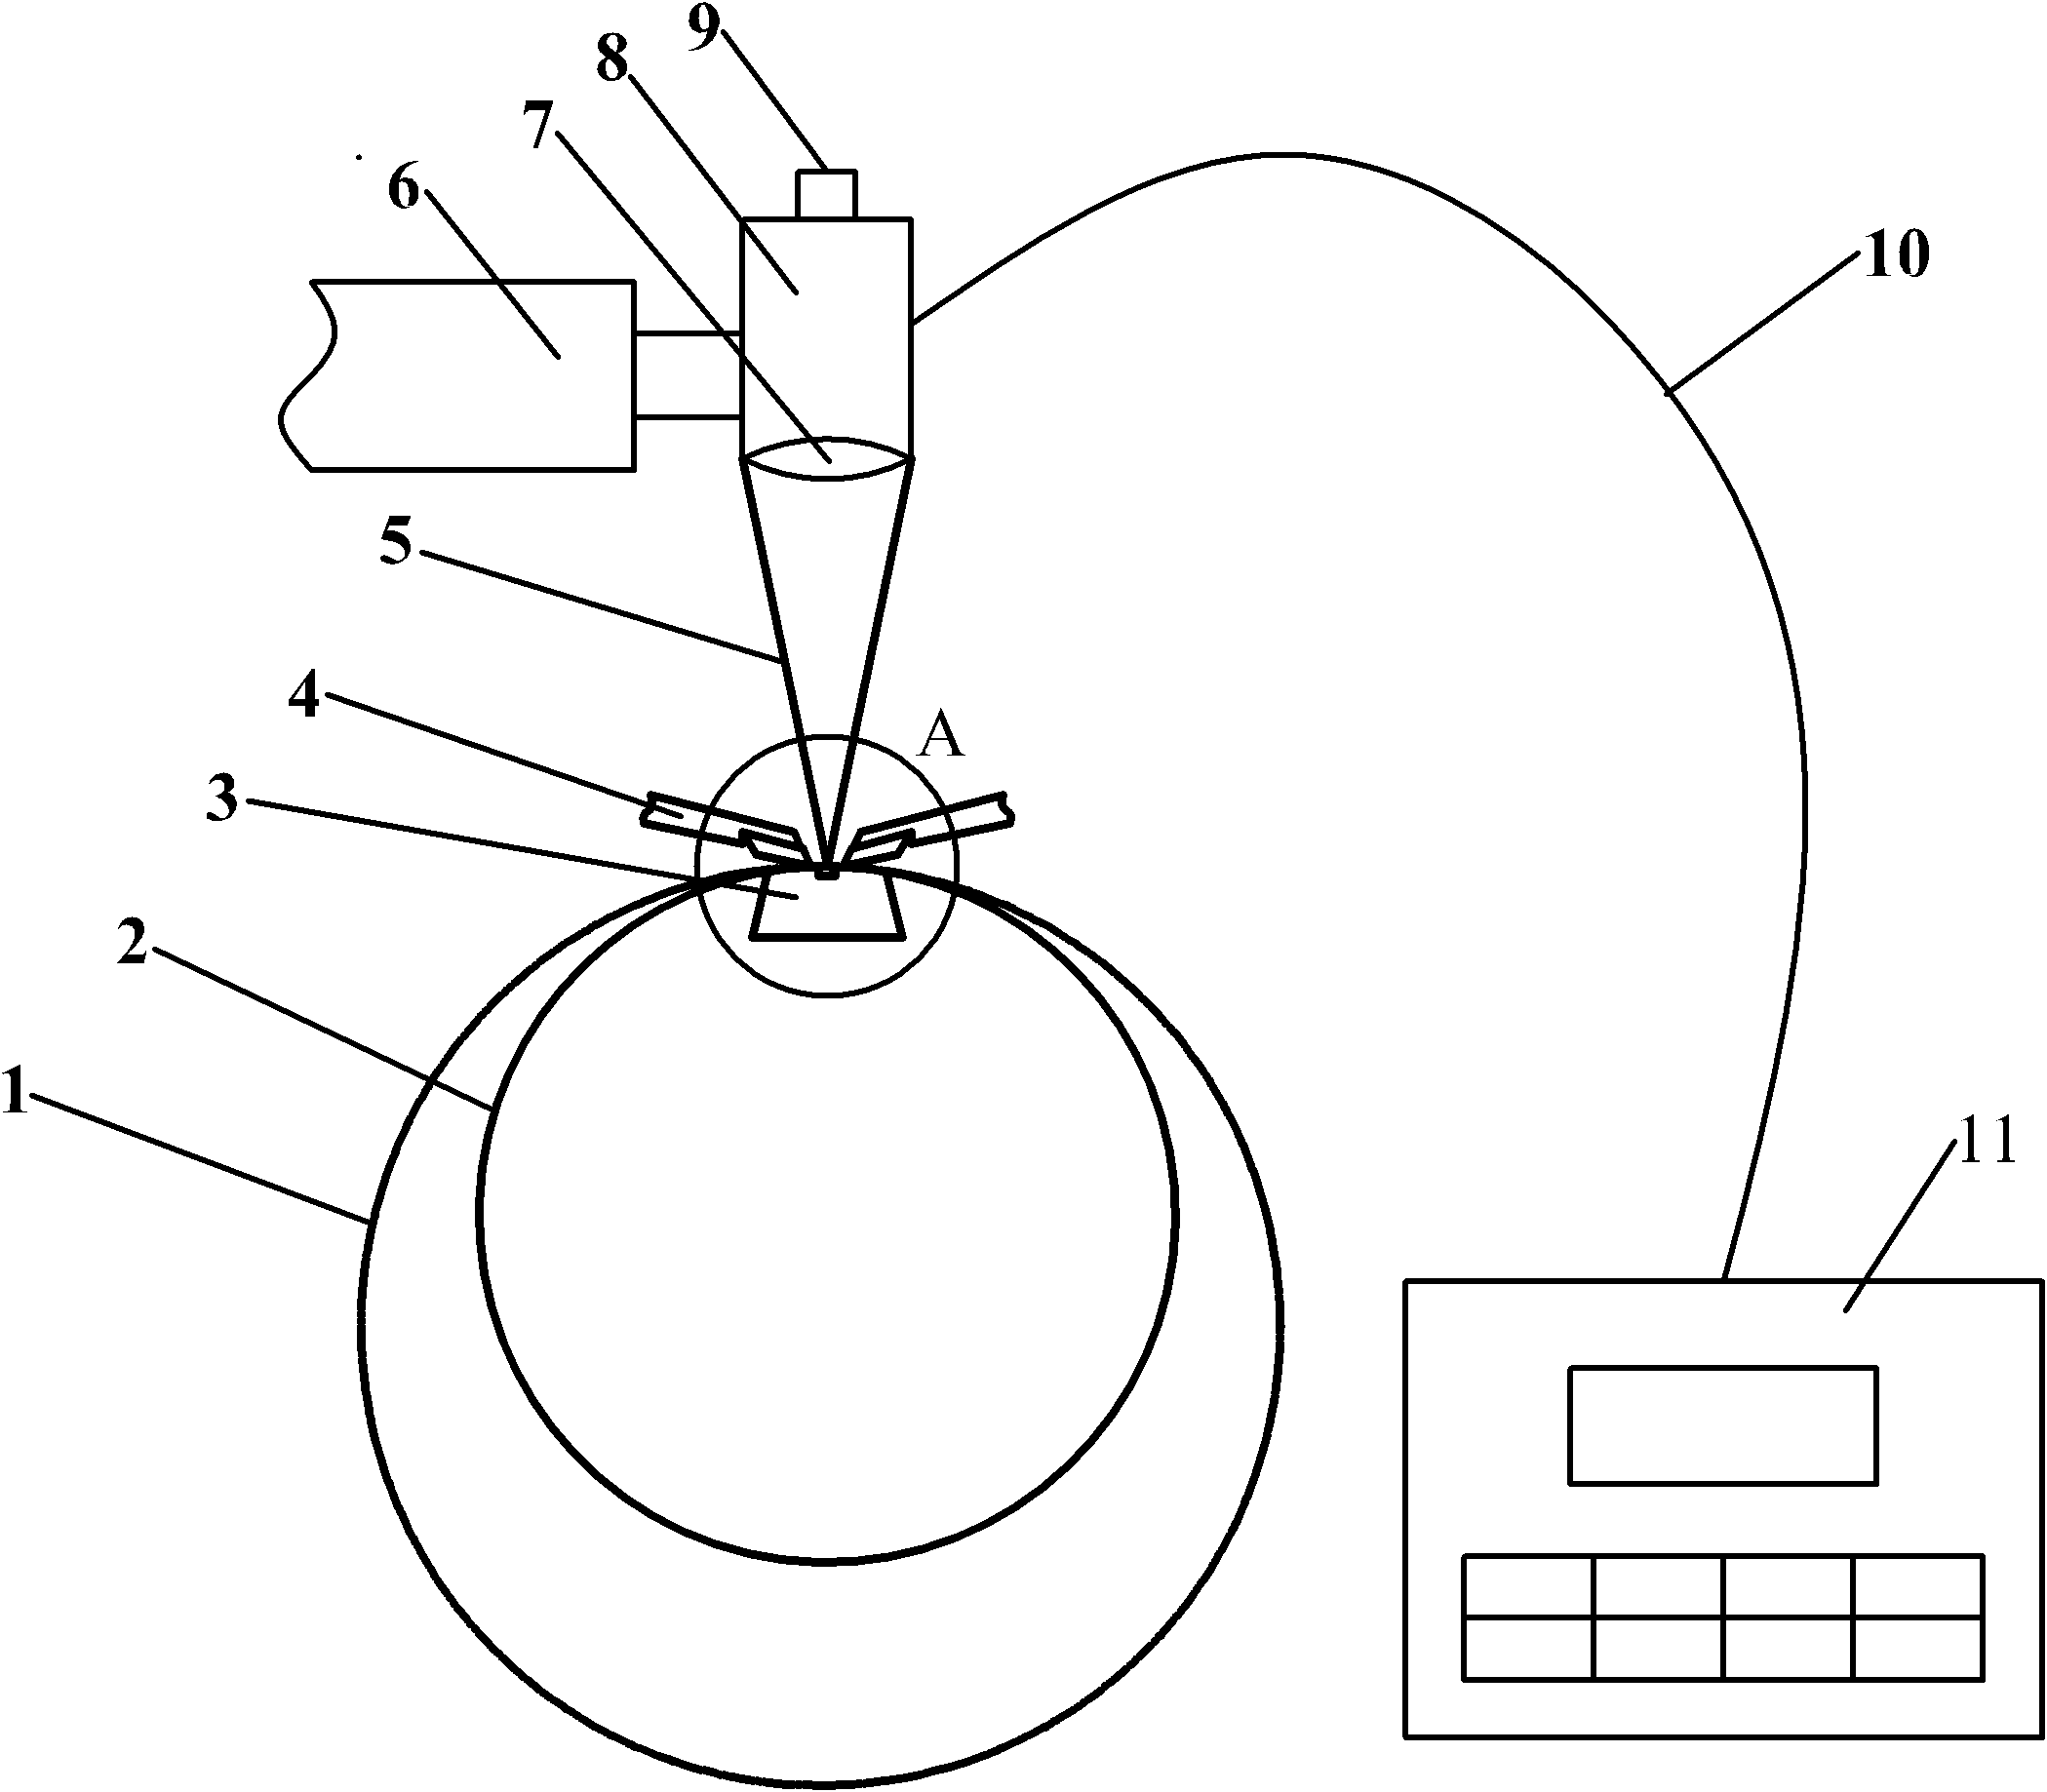 Method for welding nuclear main pump shielding can